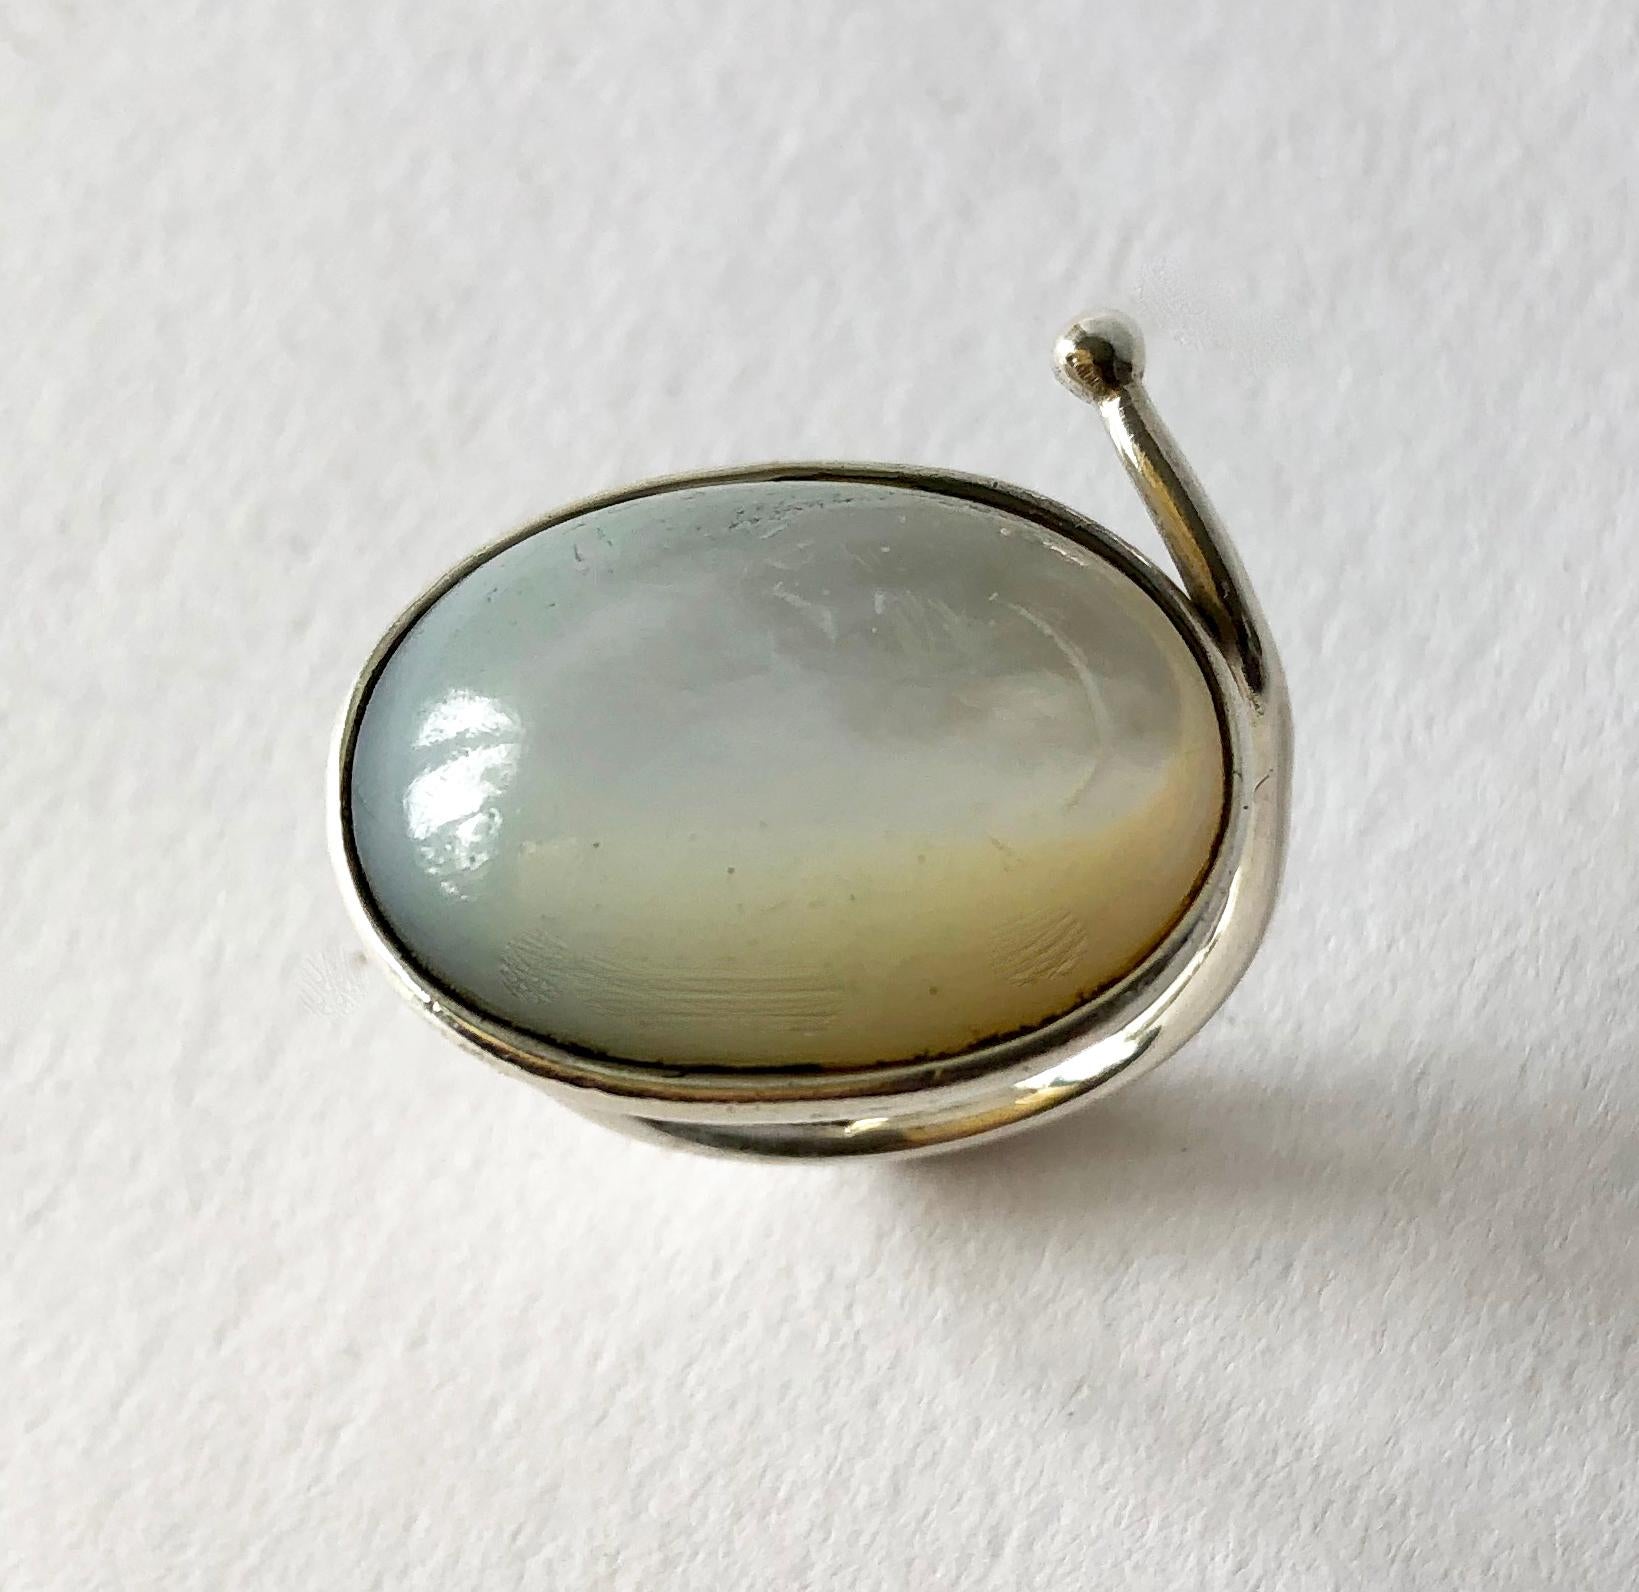 Luminescent mother of pearl stone set in sterling silver created by Vivianna Torun Bülow-Hübe. Ring is a finger size 9 - 9.25 due to its unusual shape.  Signed Torun, Sterling. In very good vintage condition showing some wear to the silver conducive